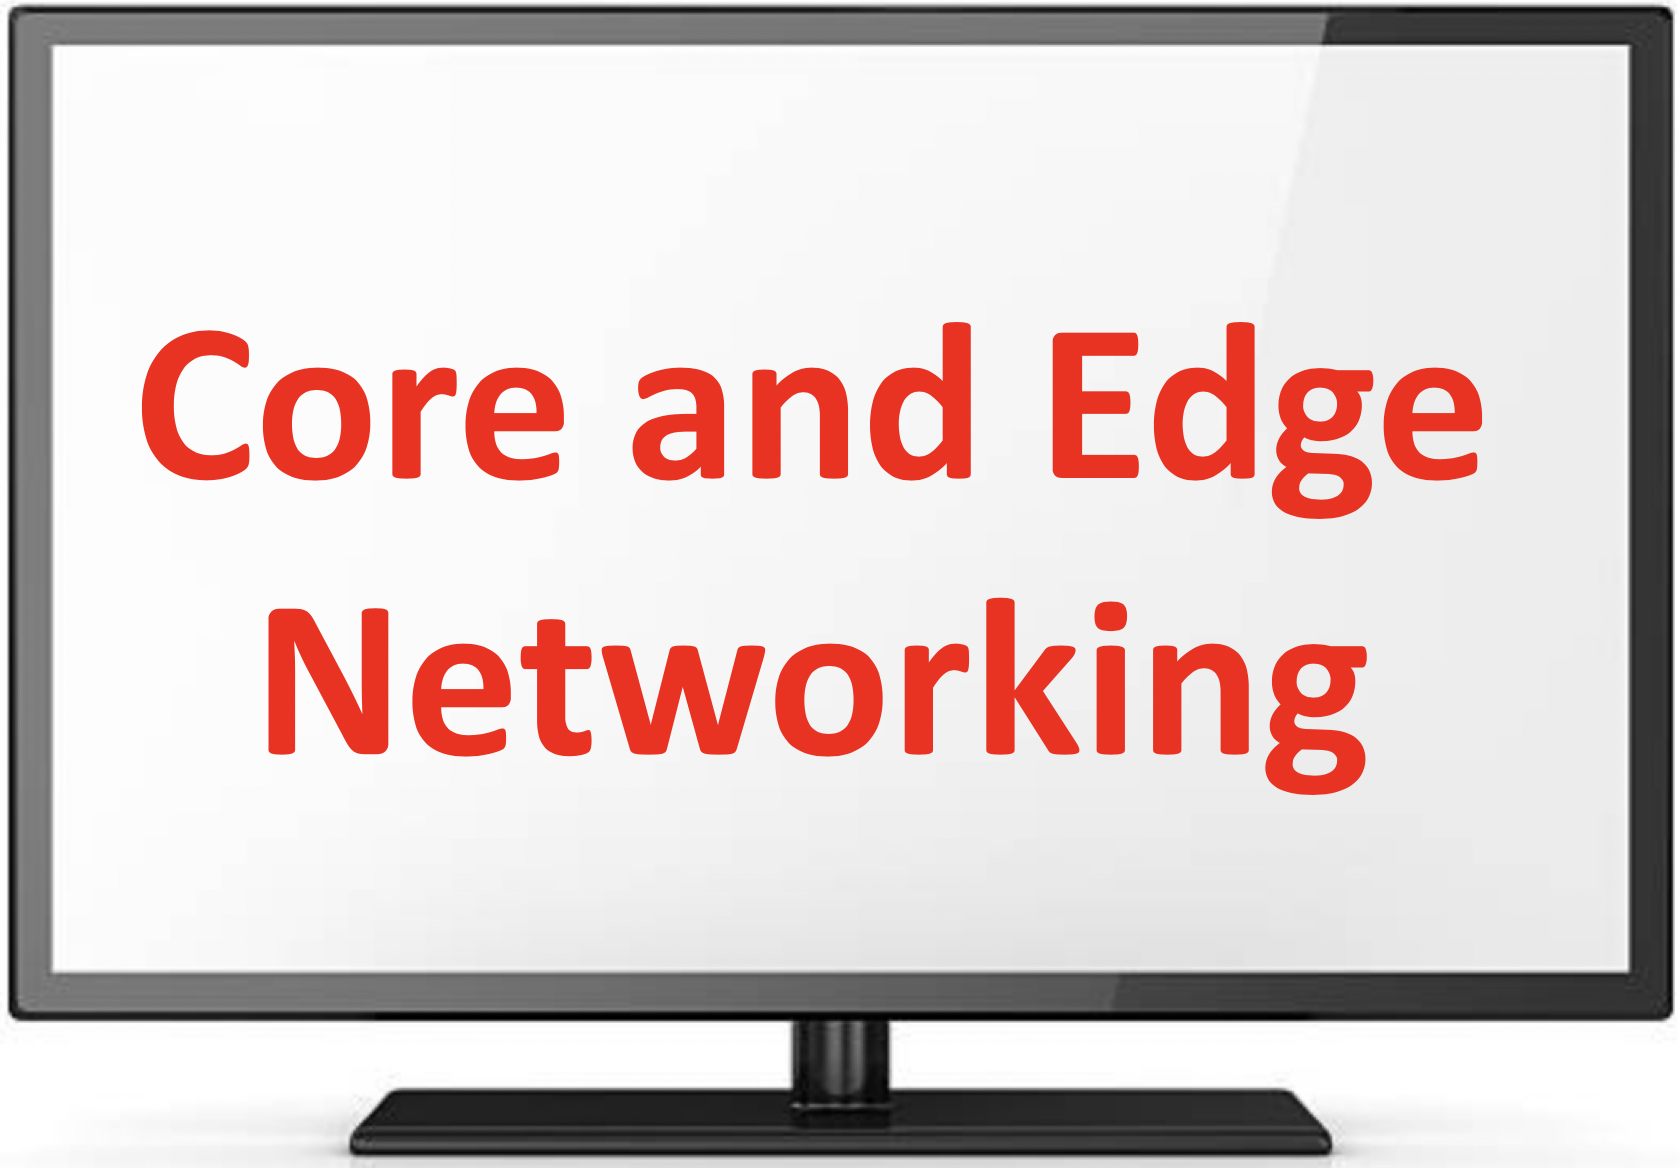 Core and Edge Networking